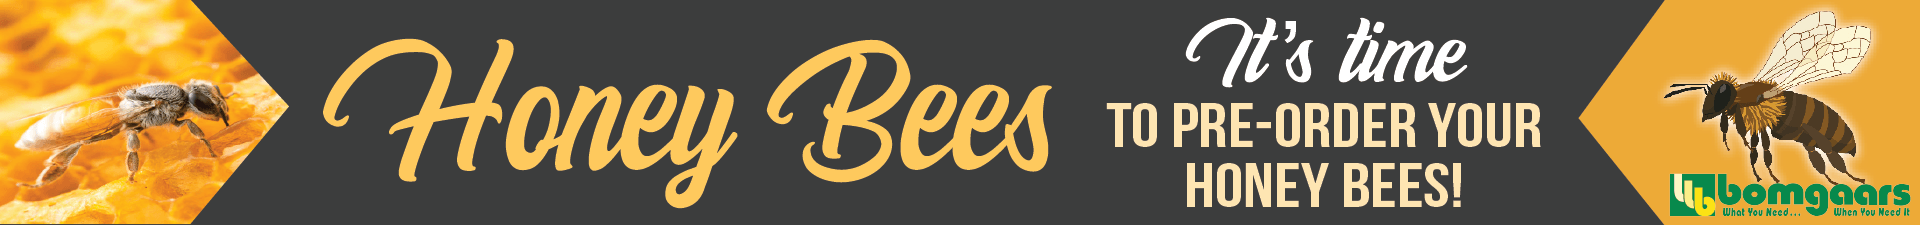 Live Bees